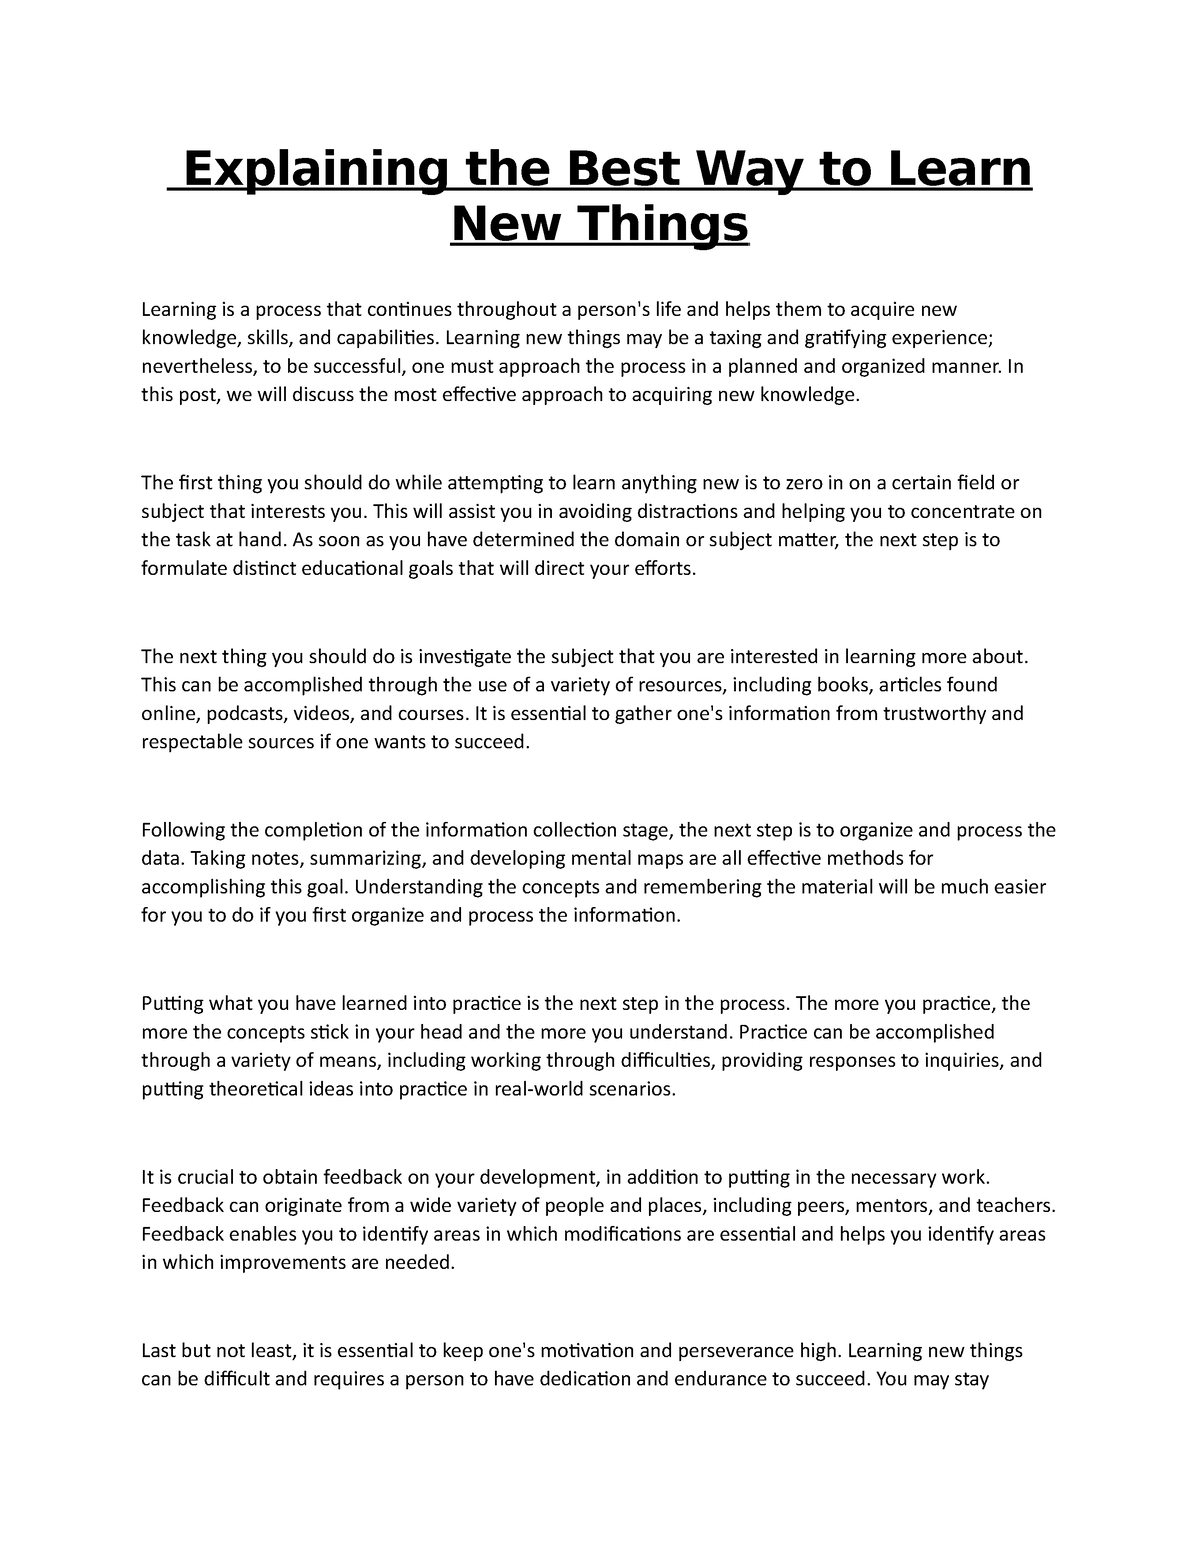 learning new things essay